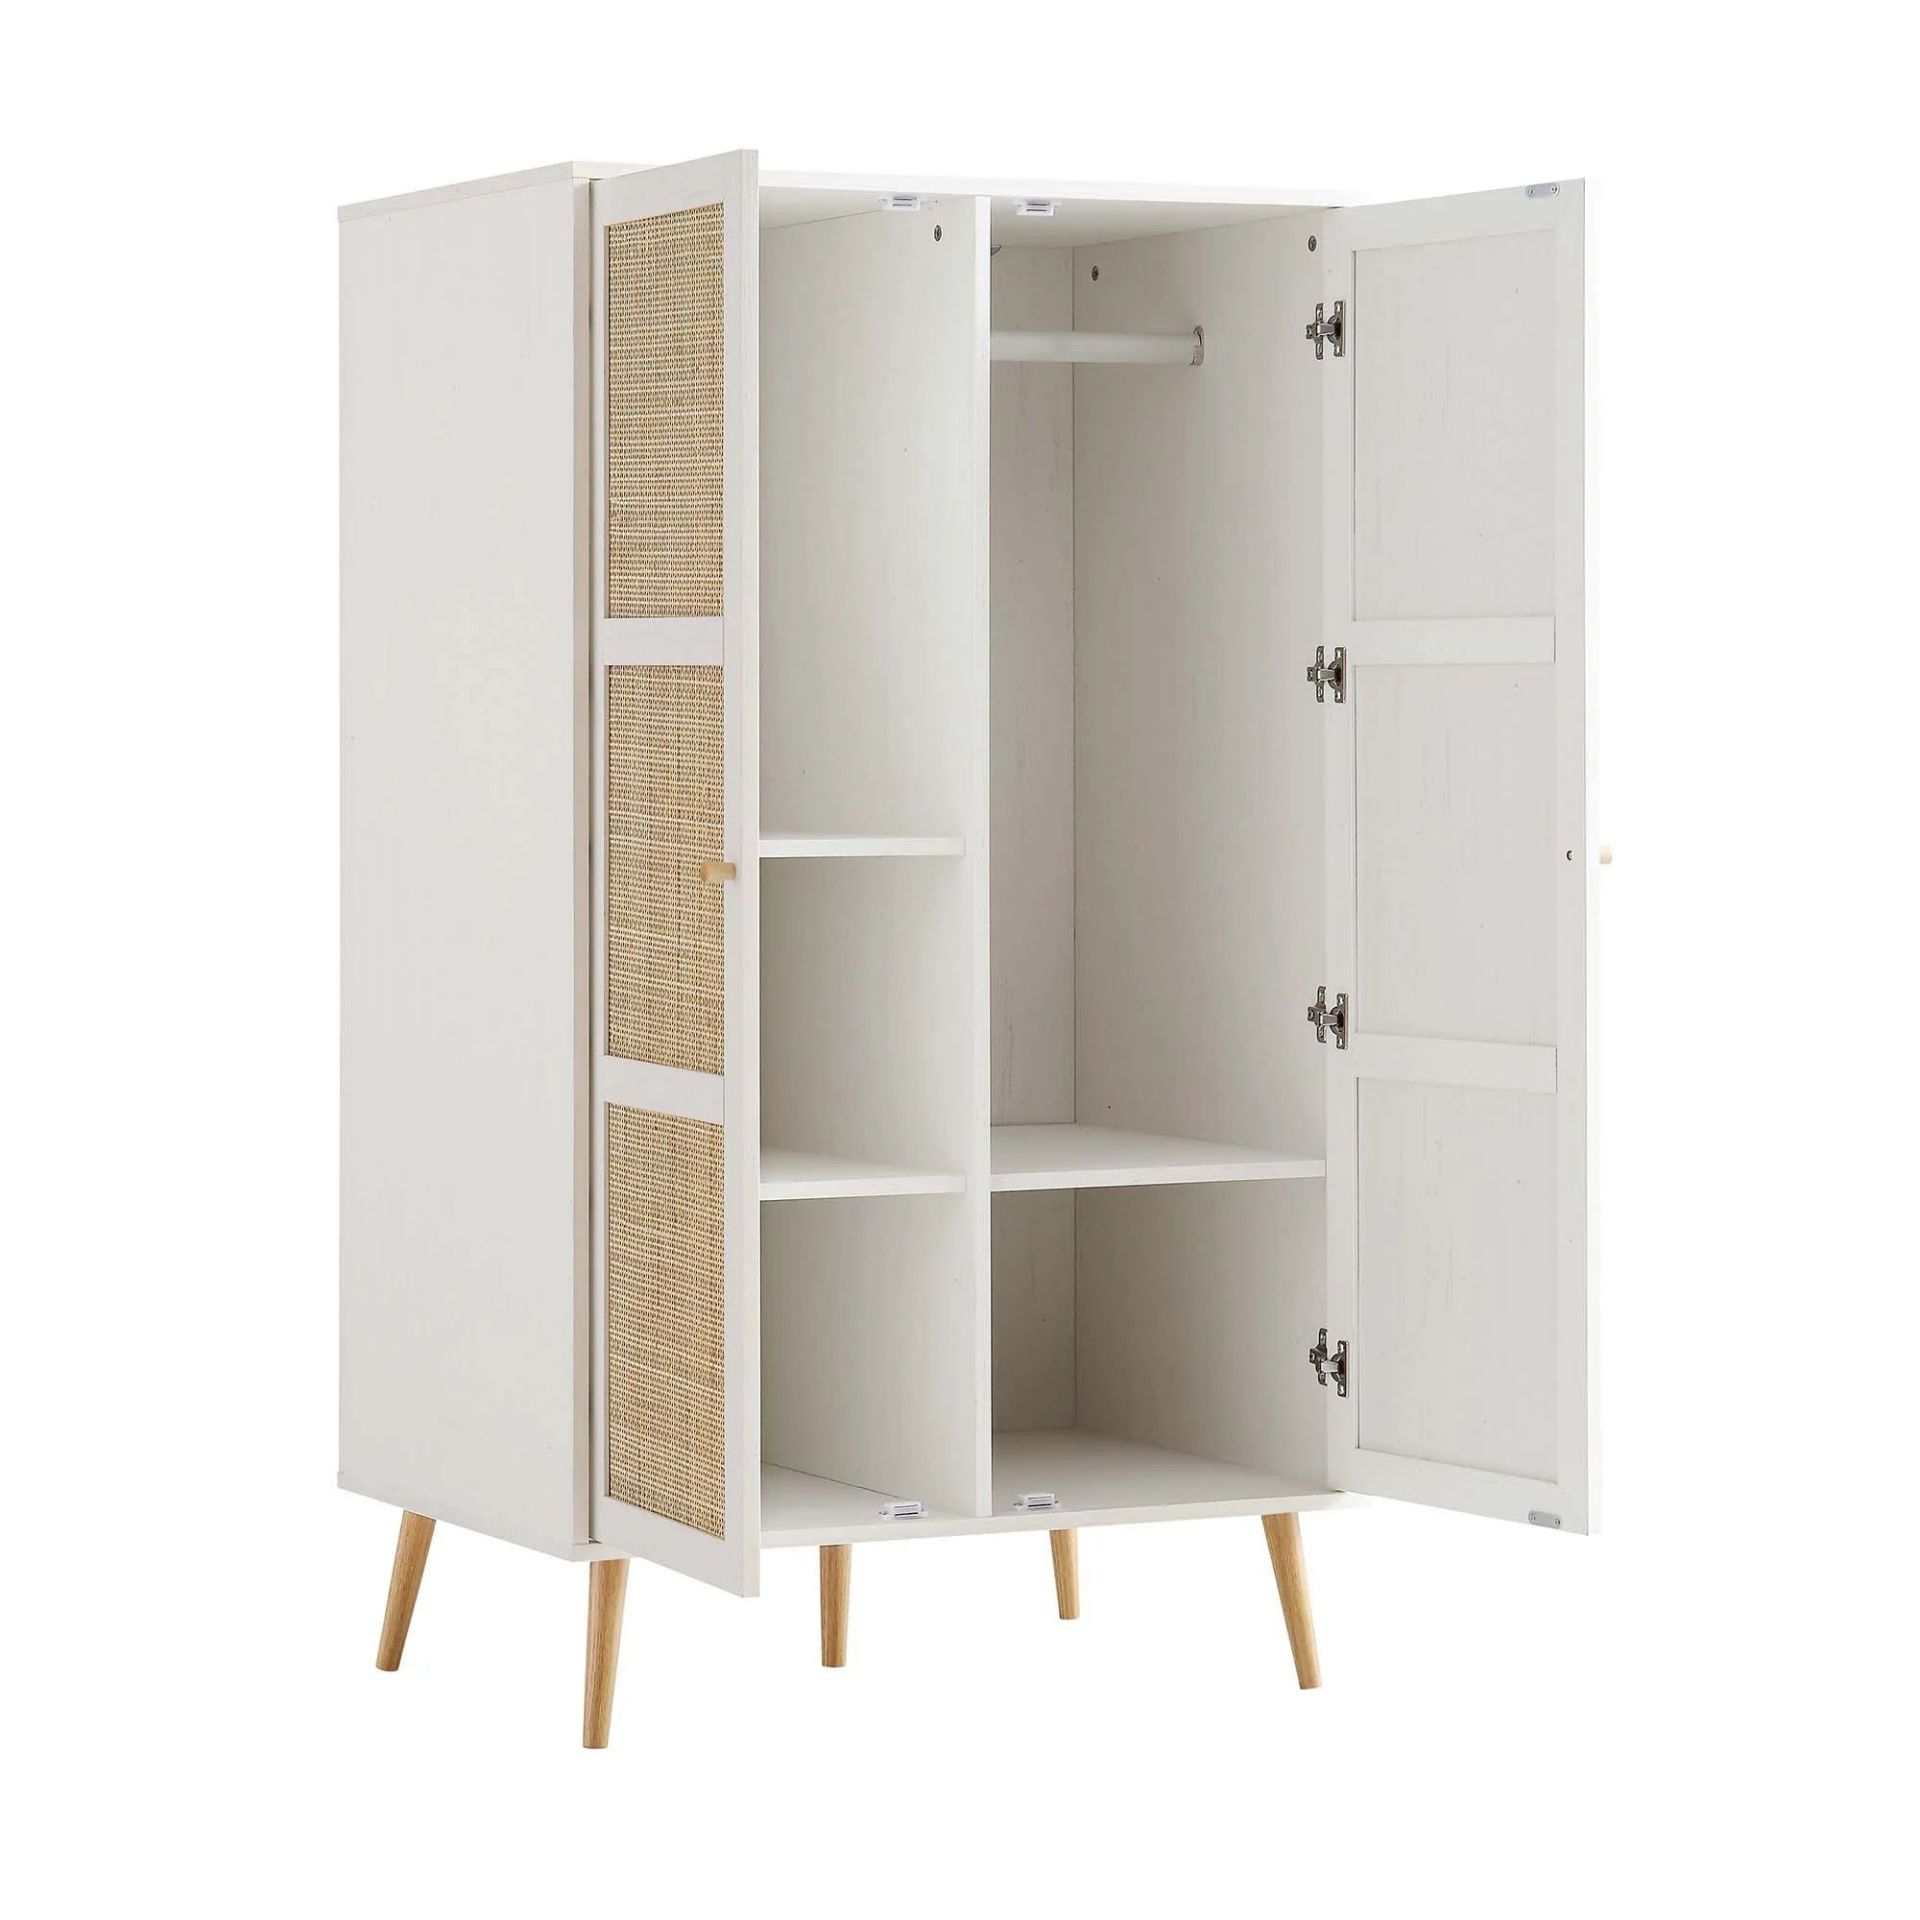 Frances Woven Rattan Compact Double Wardrobe, White. - R14. RRP £399.99. Crafted from wood and - Bild 2 aus 2